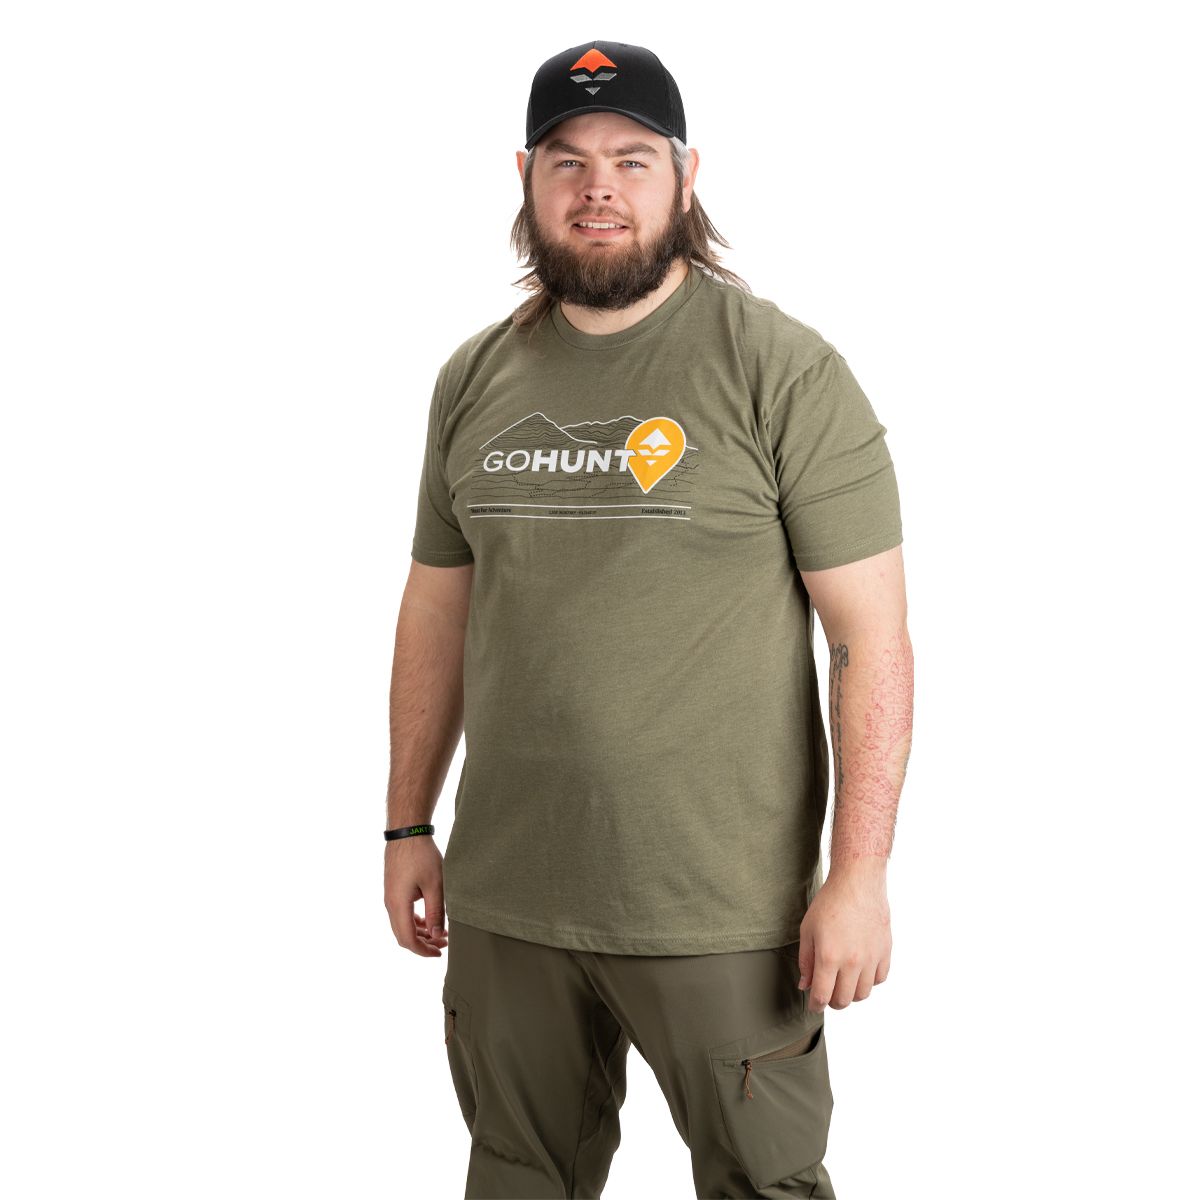 GOHUNT Scout Tee in Millitary Green by GOHUNT | GOHUNT - GOHUNT Shop